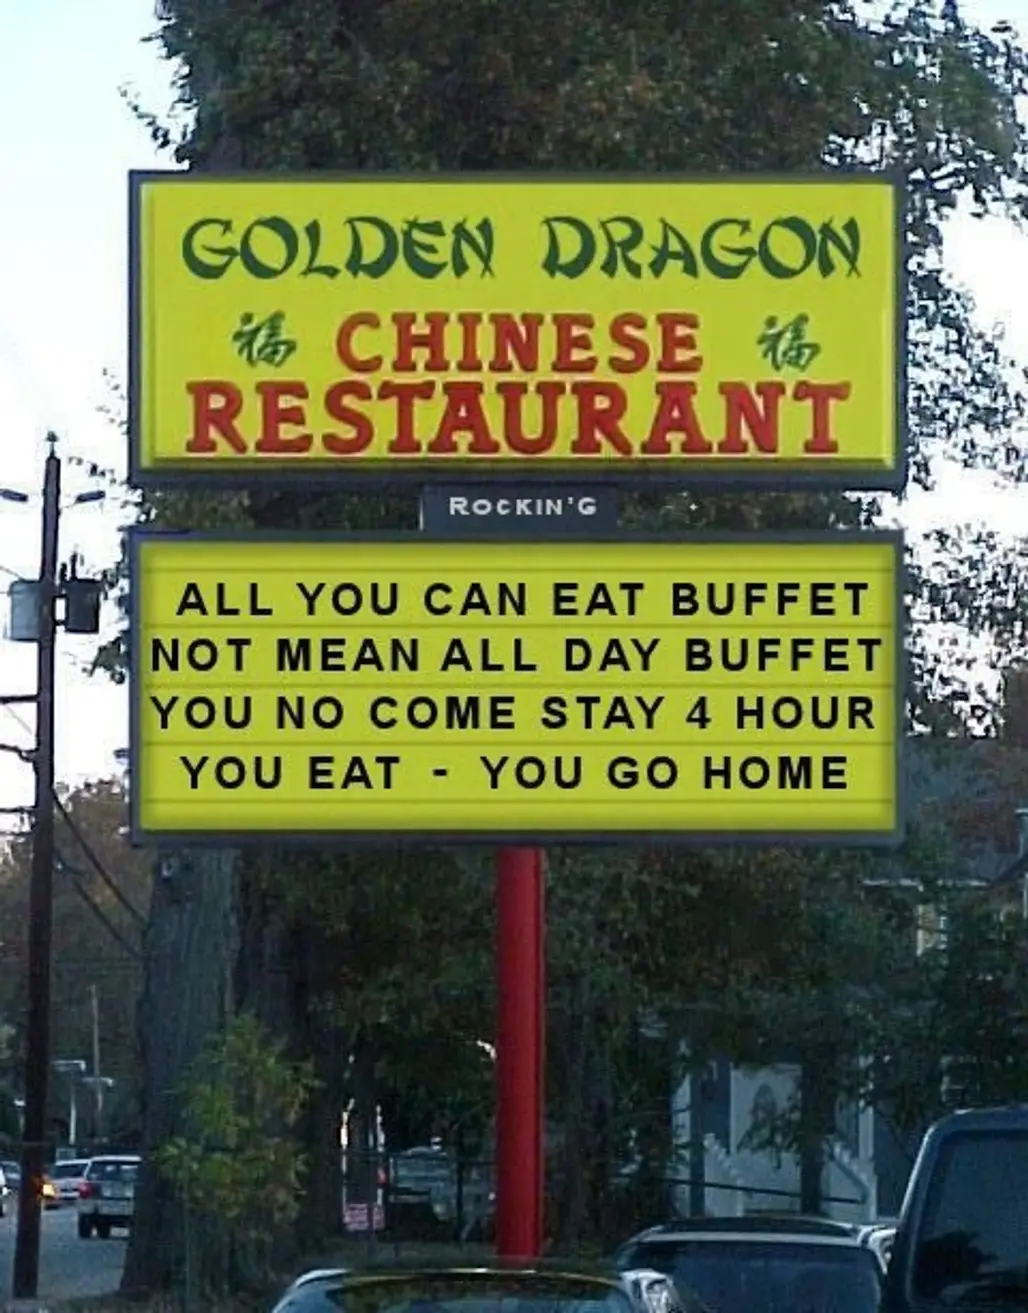 Chinese Food